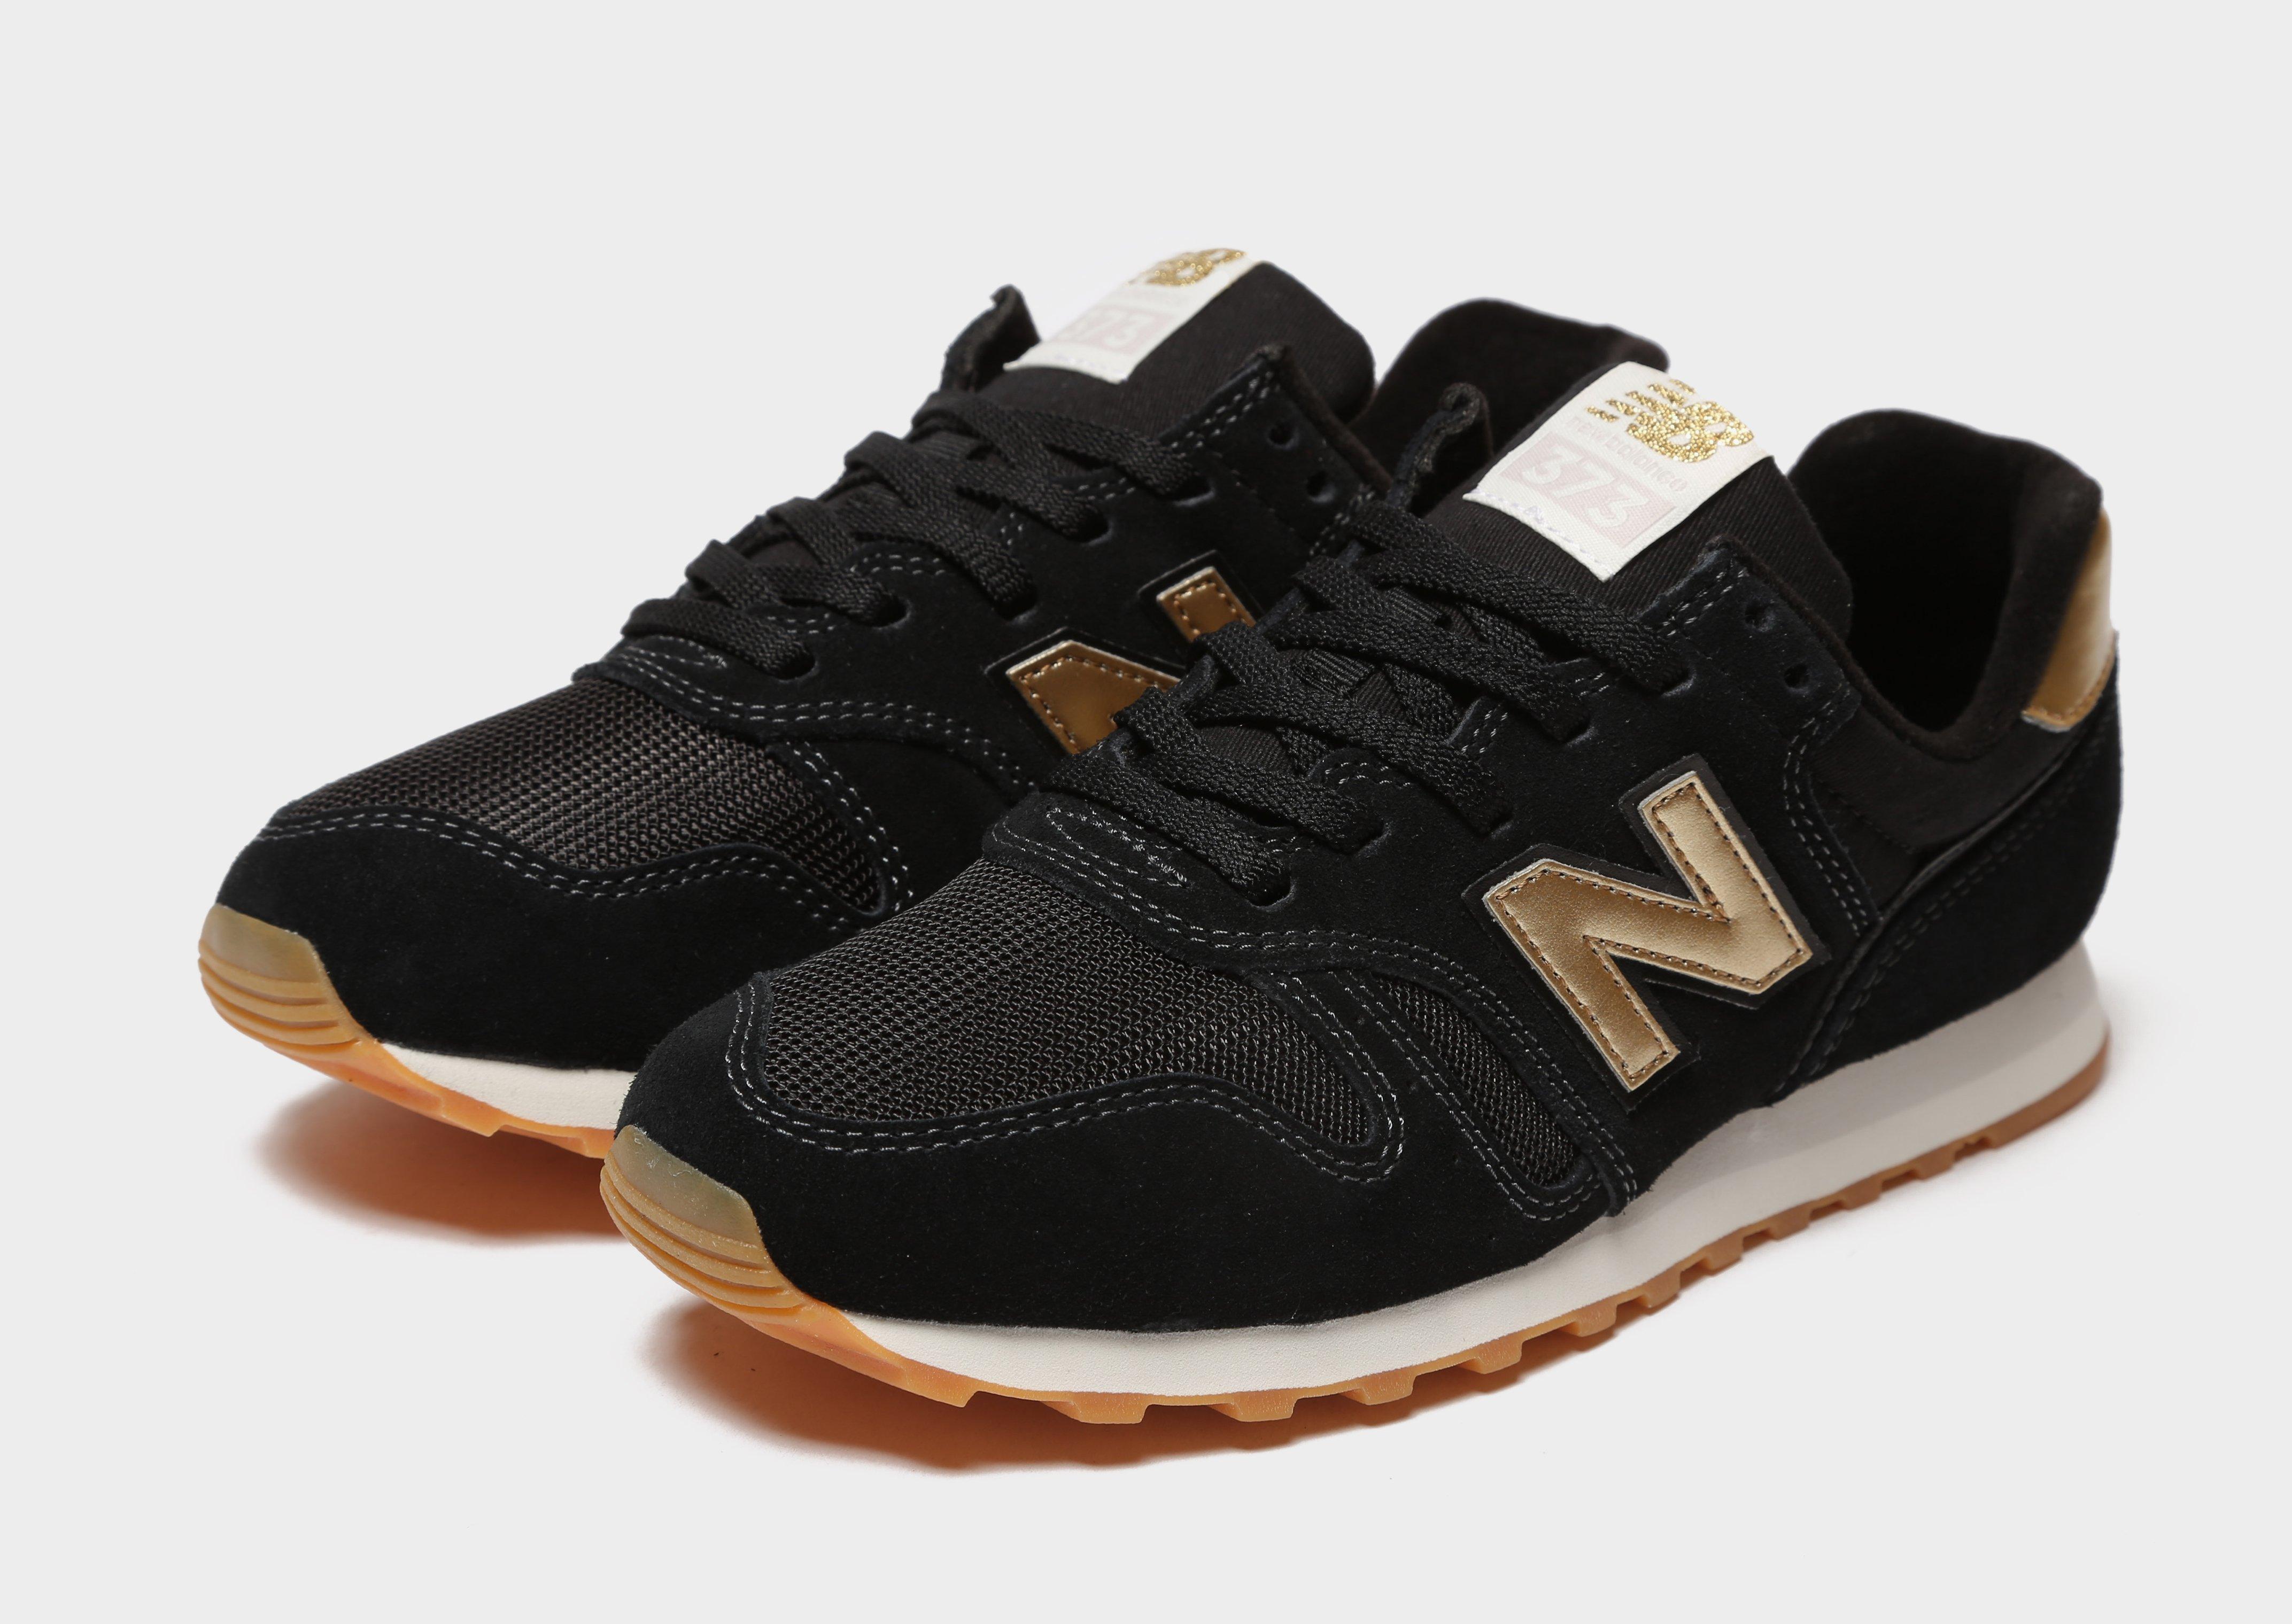 new balance 373 womens black and gold